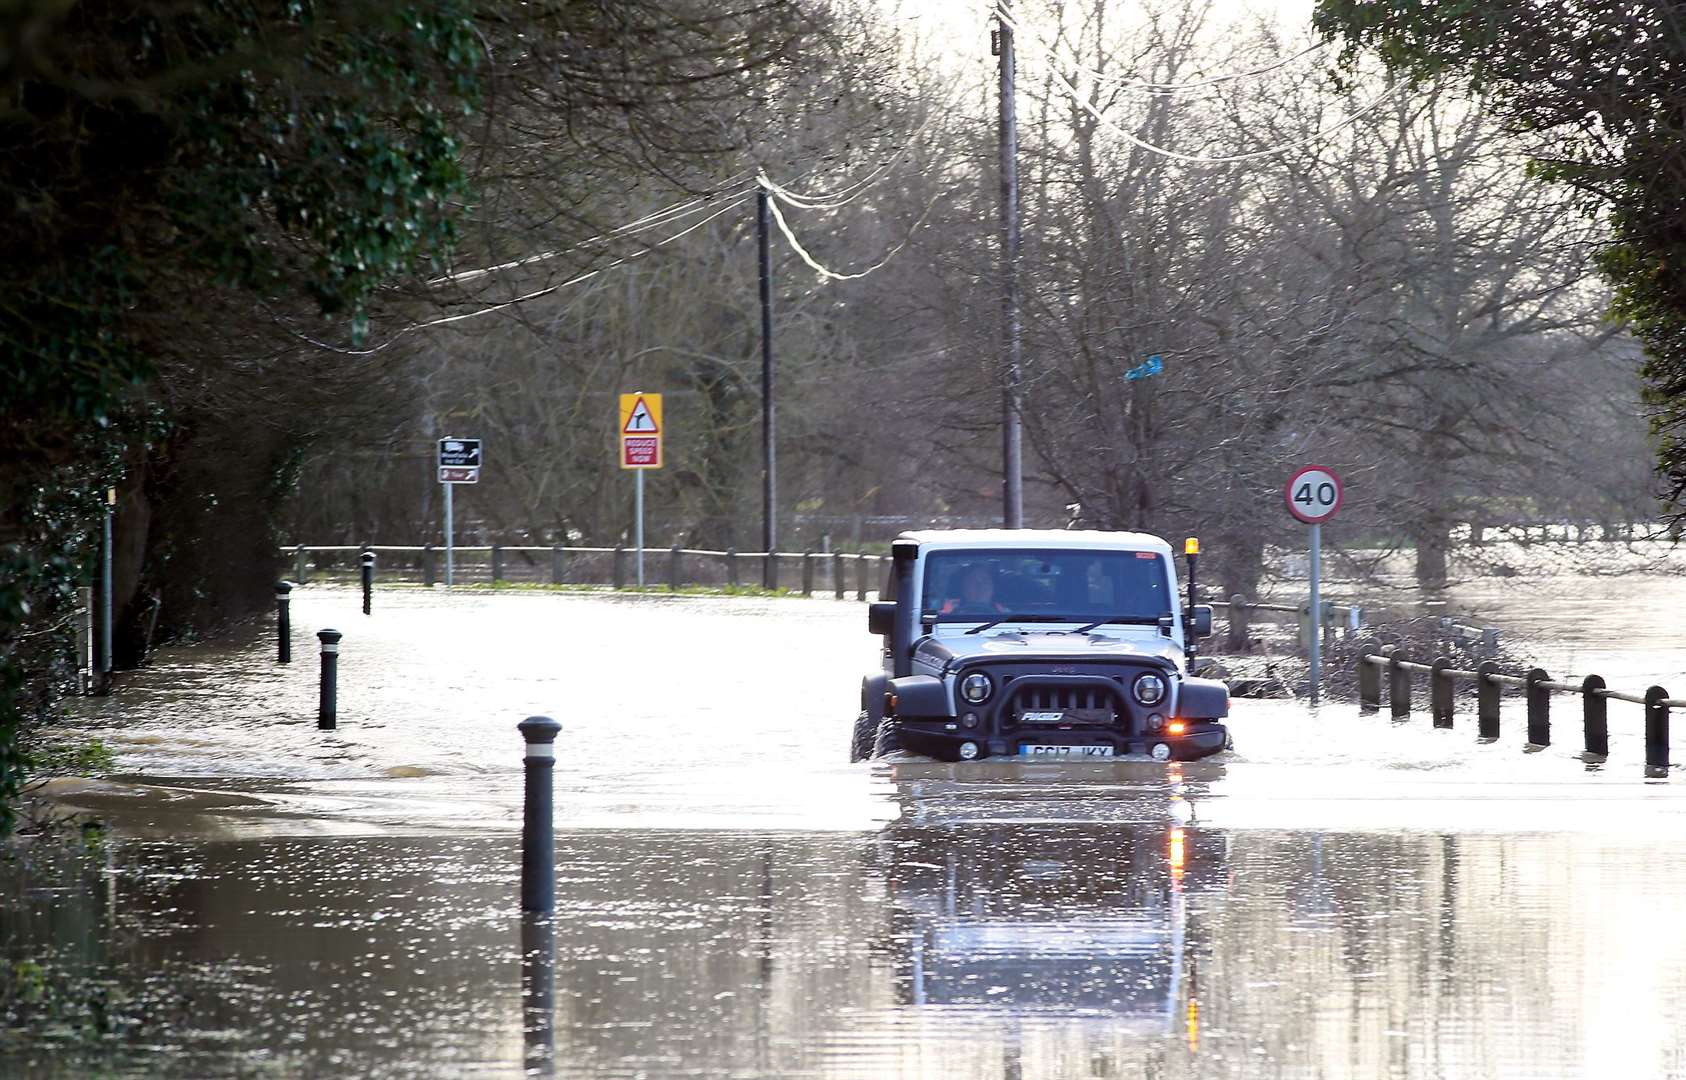 The main road into Yalding was under water after flooding in March 2020 Picture: Phil Lee